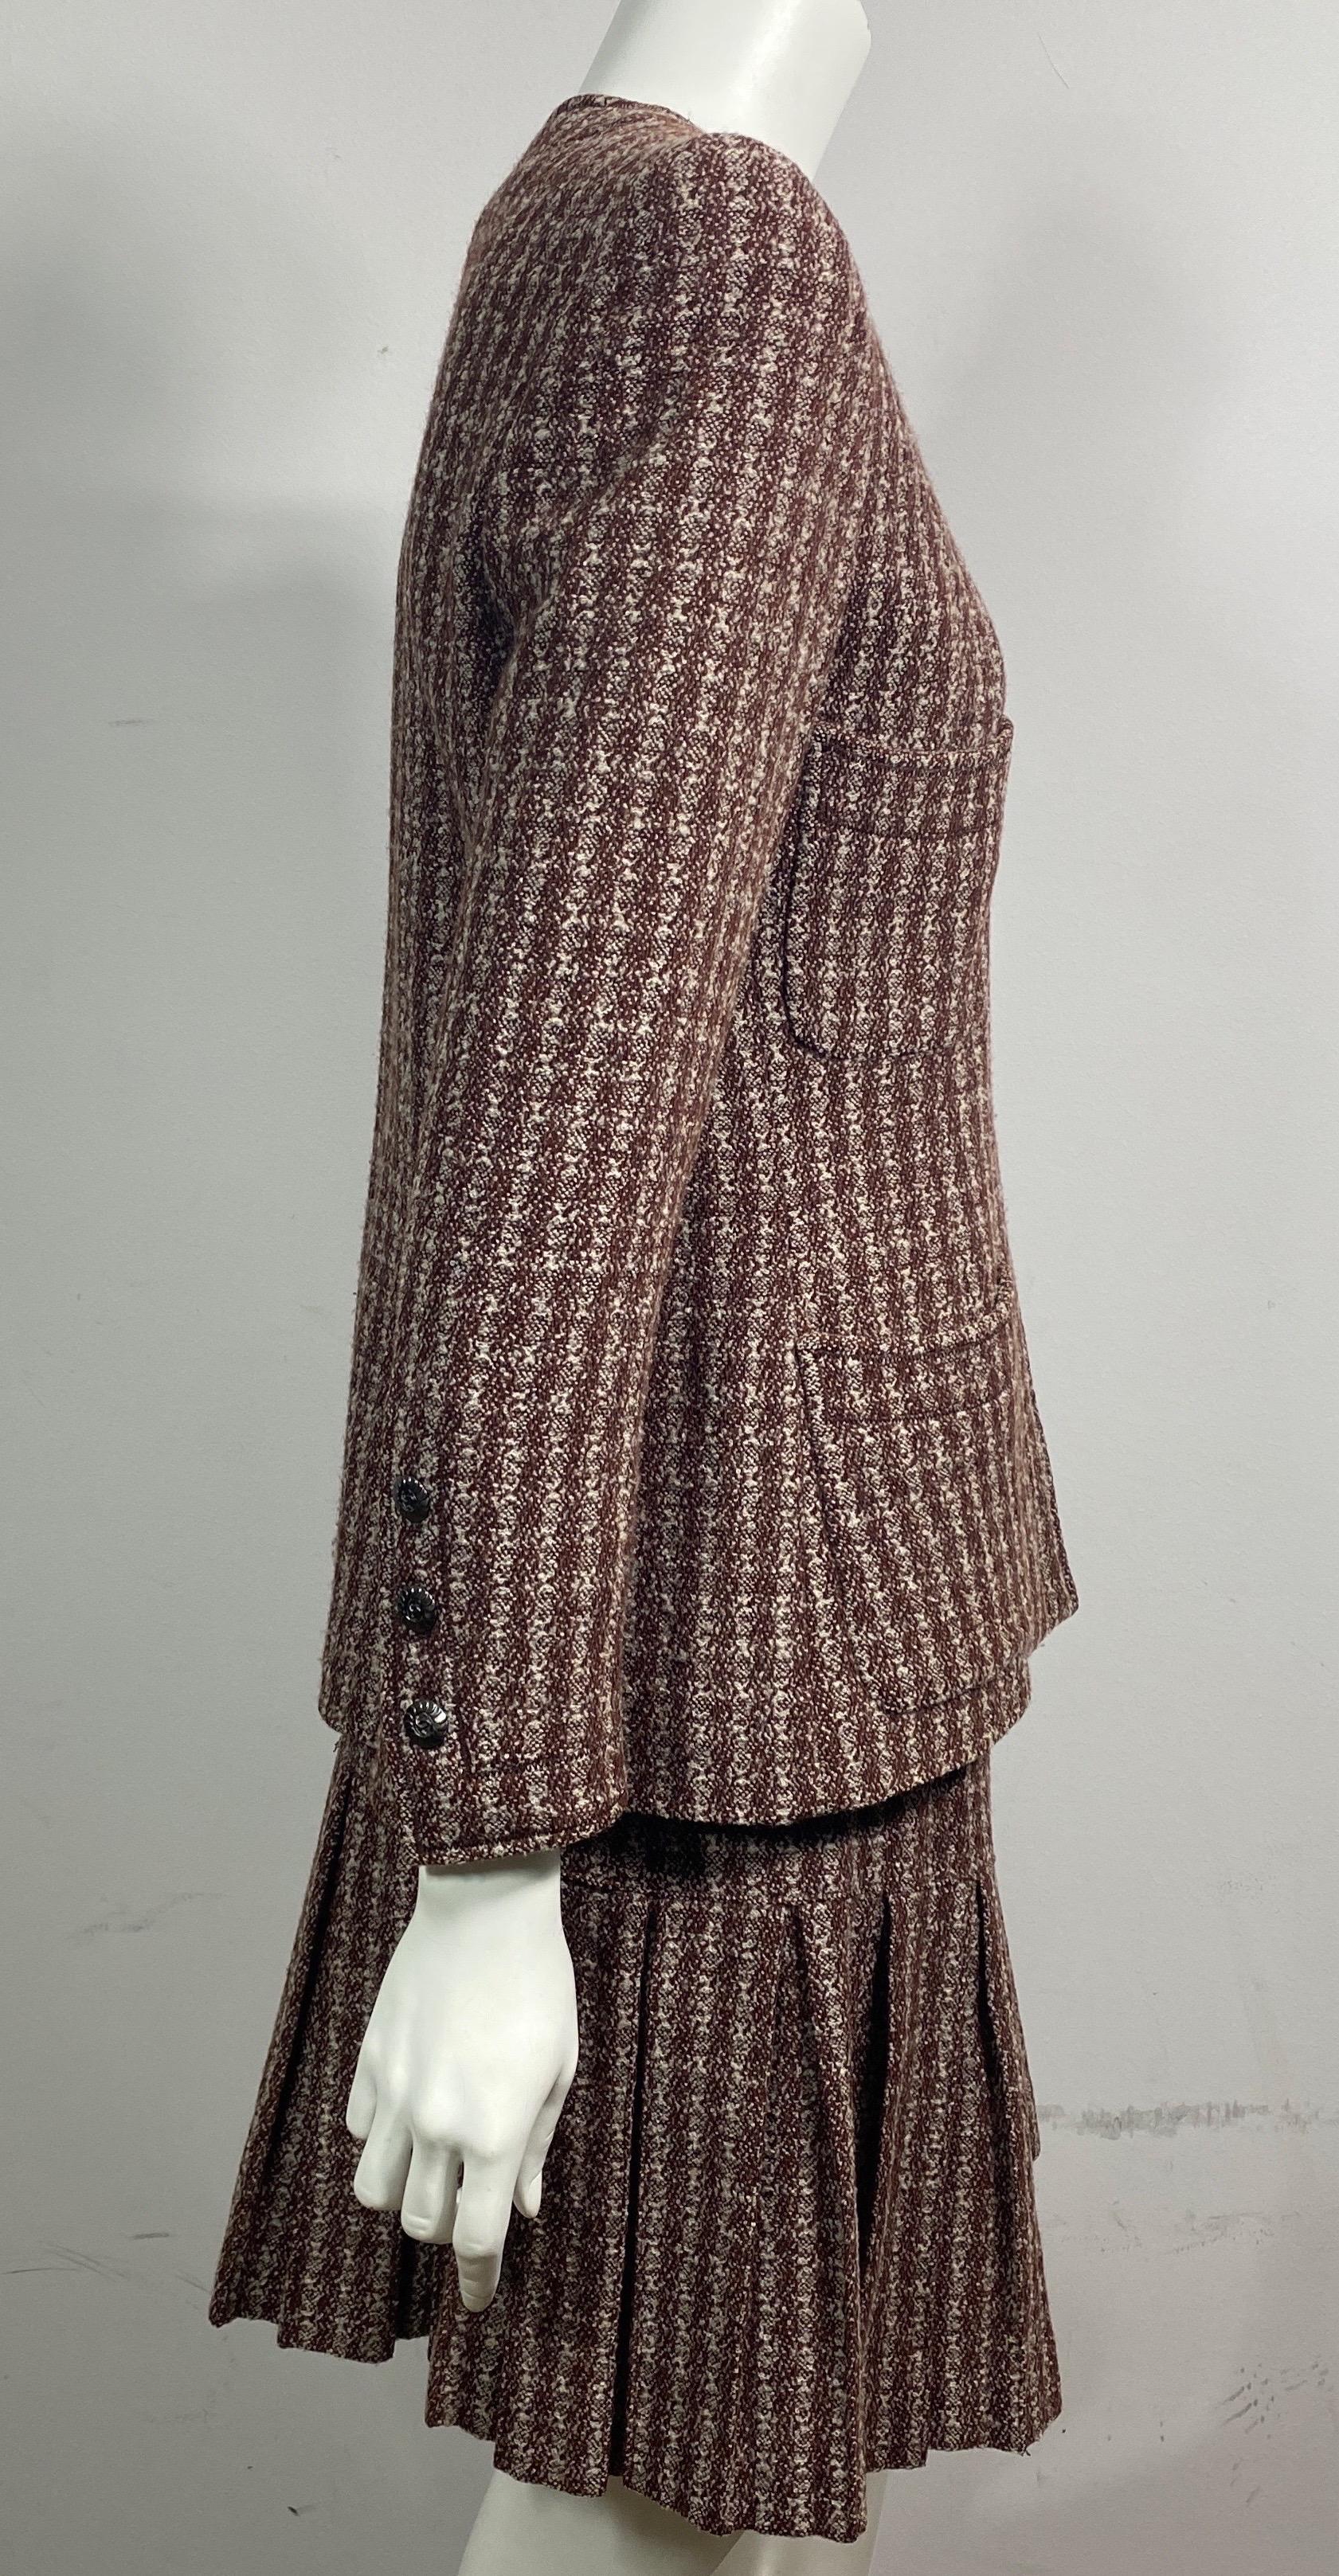 Chanel 1990’s Brown and Crème Wool Nailshead Tweed Skirt Suit-size 36 For Sale 5